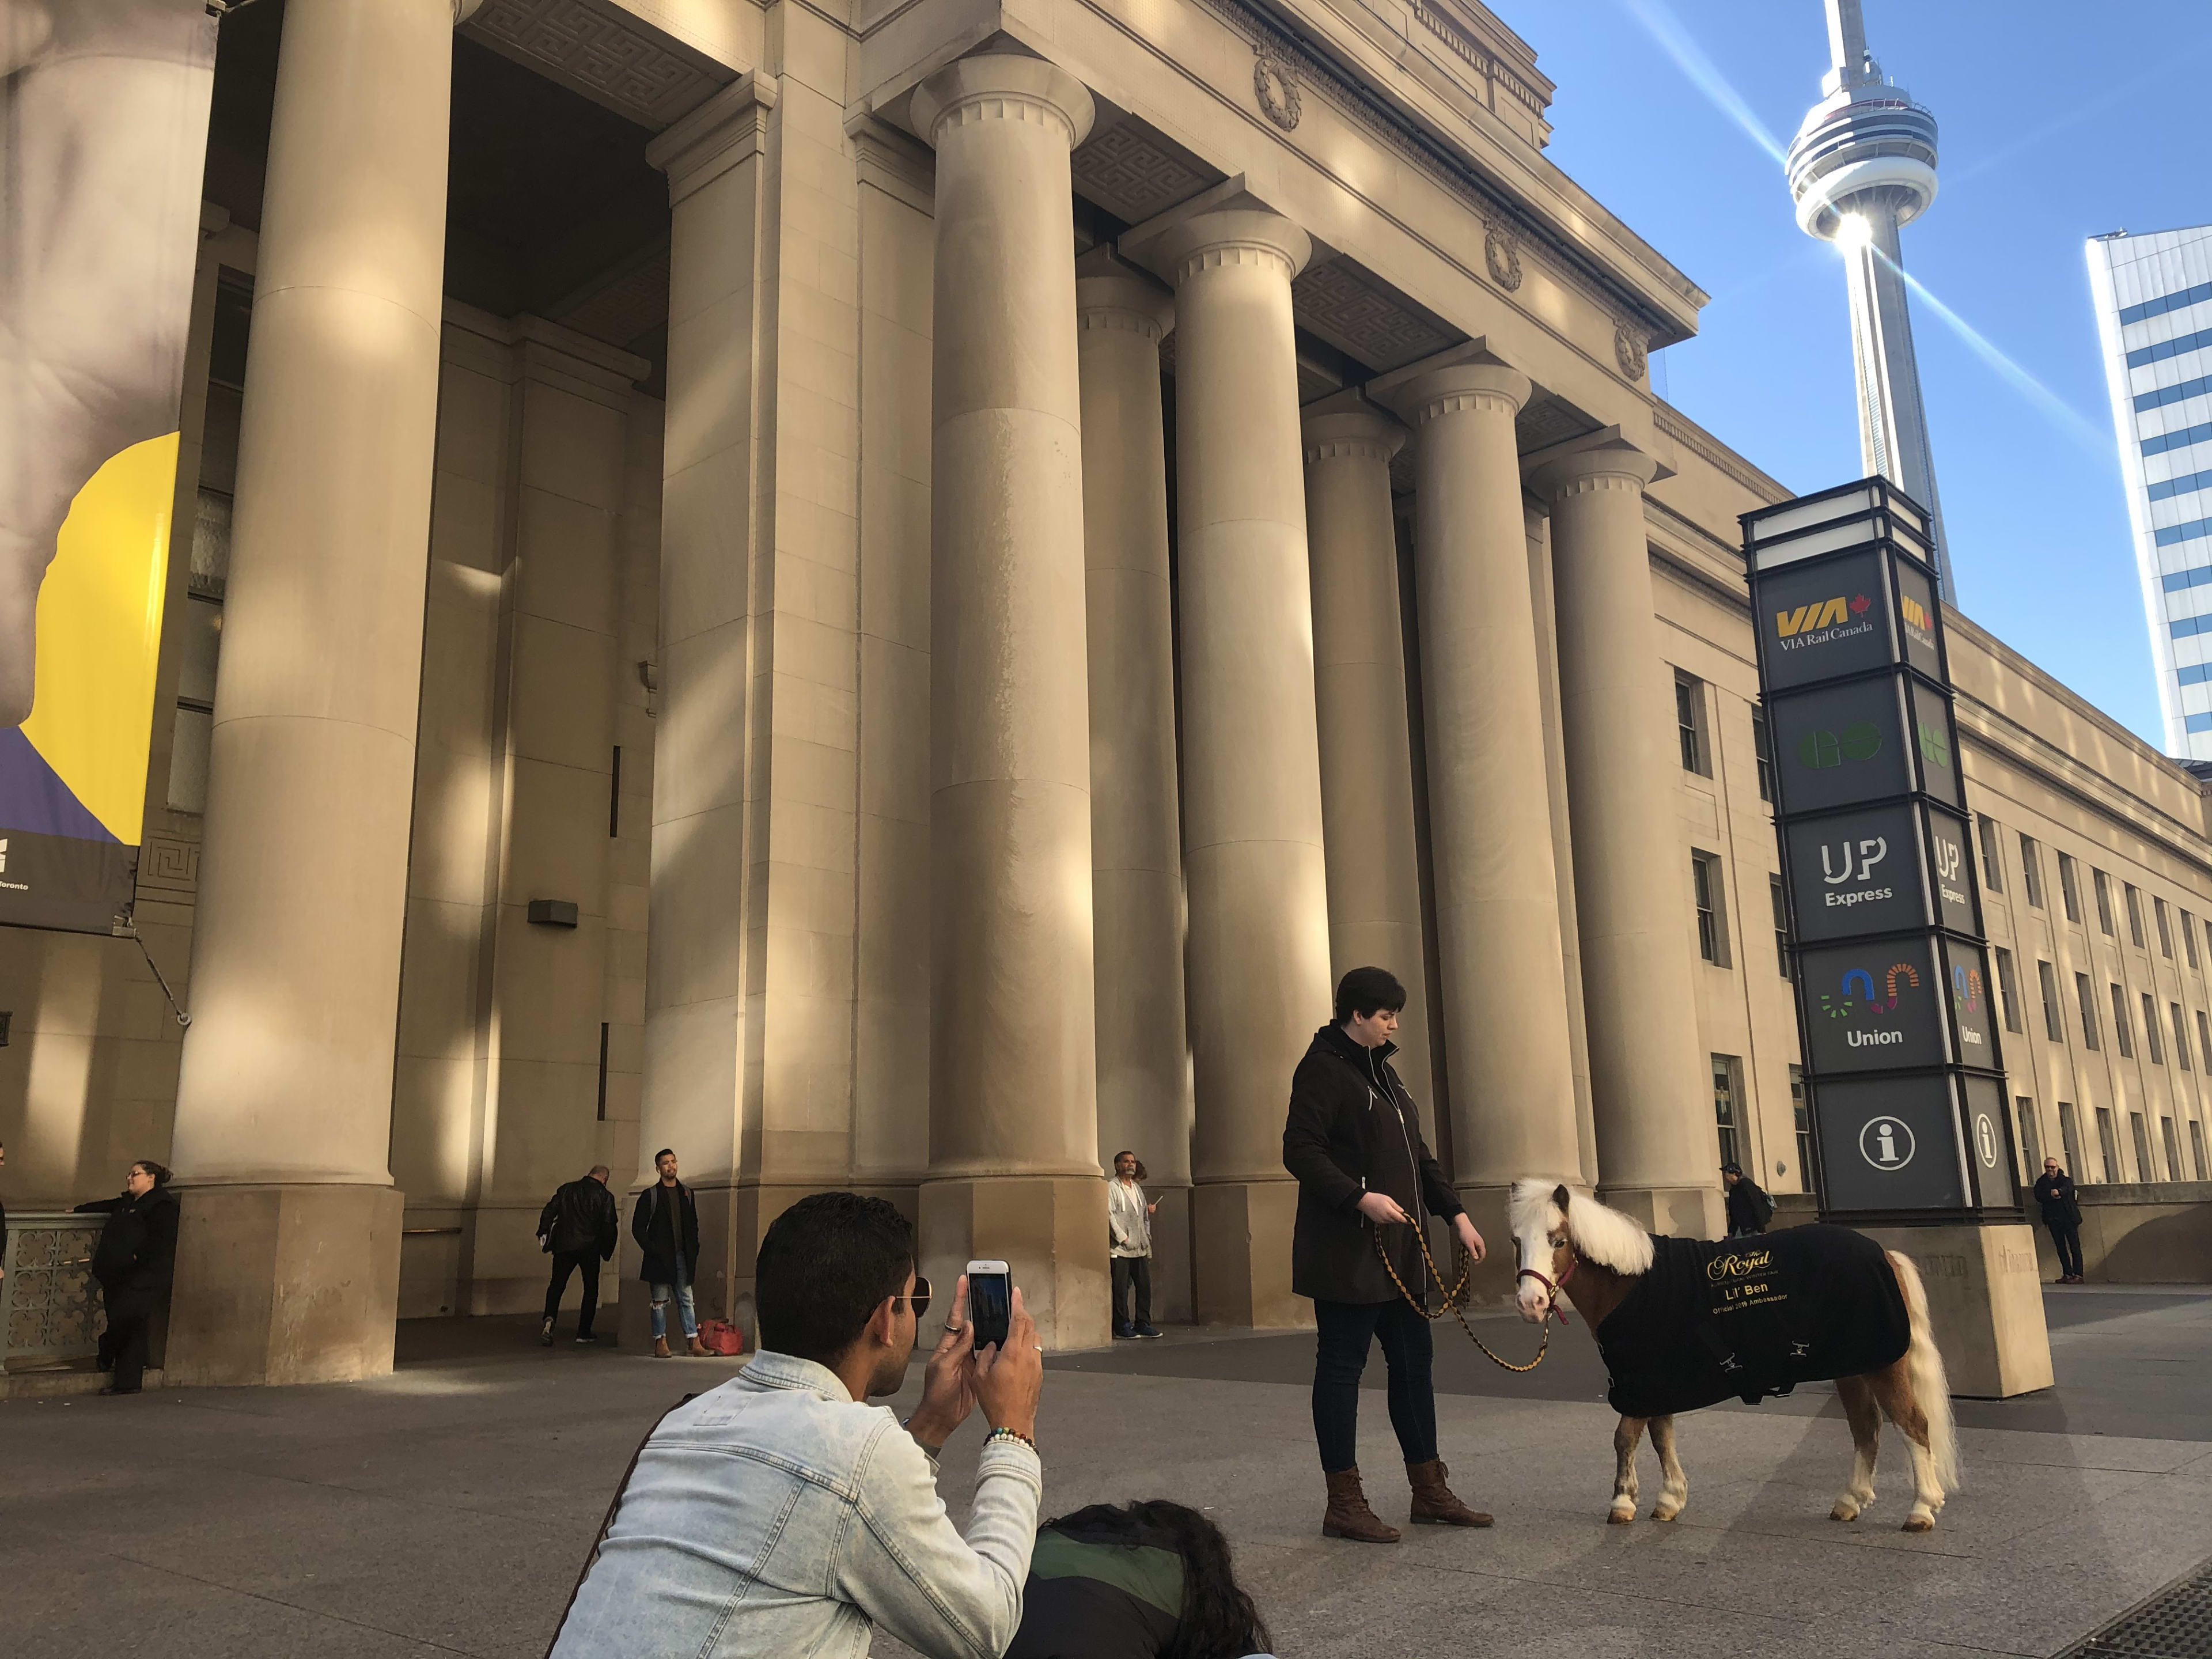 Mini-horse posing in front of the CN Tower